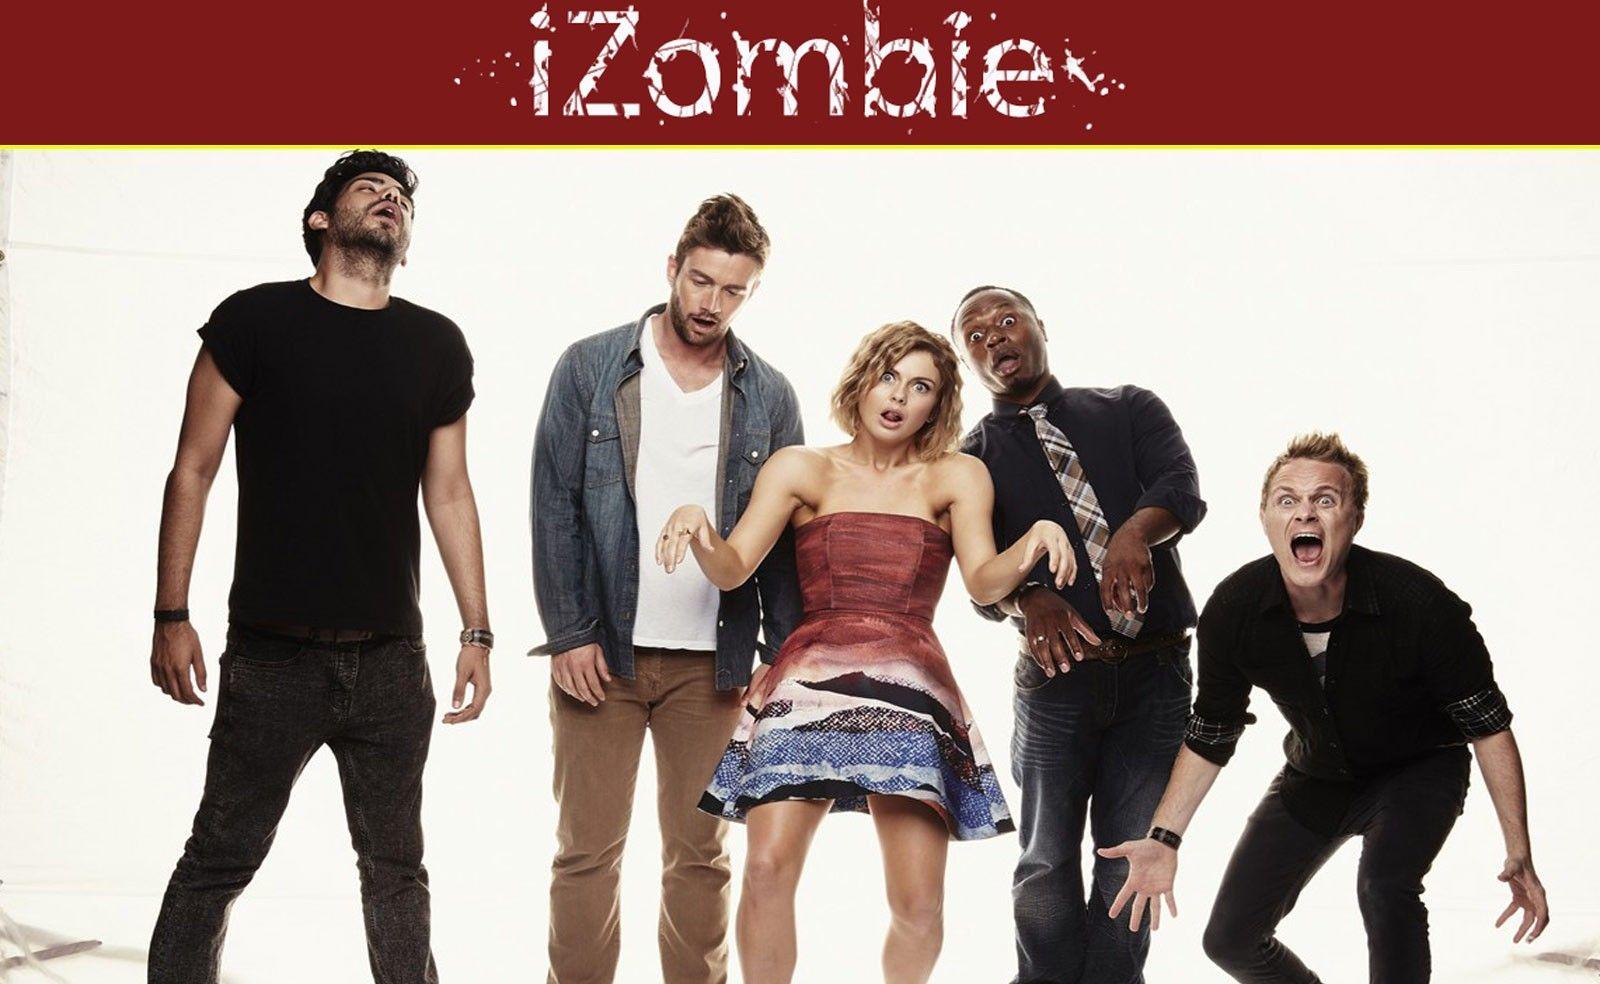 Reasons to Catch Up for the iZombie Season 3 Premiere. We Live